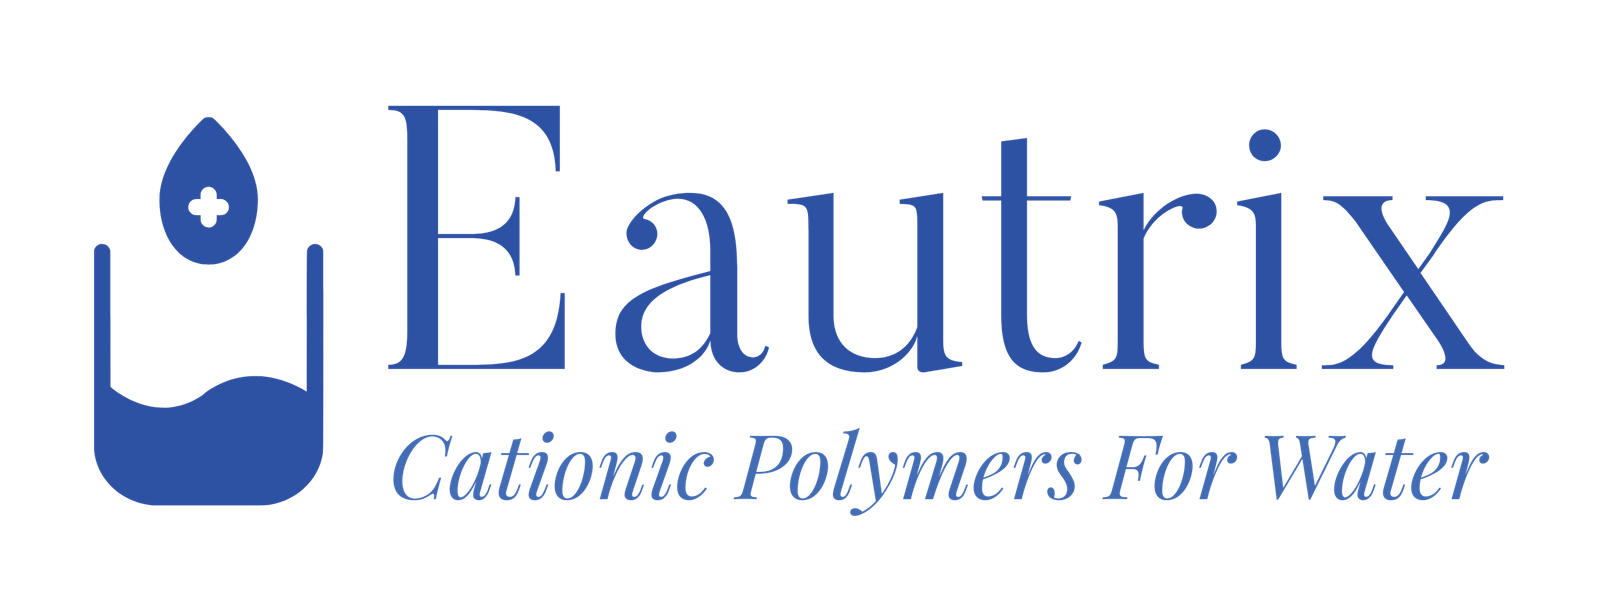 Eautrix – Cationic Polymers for Water